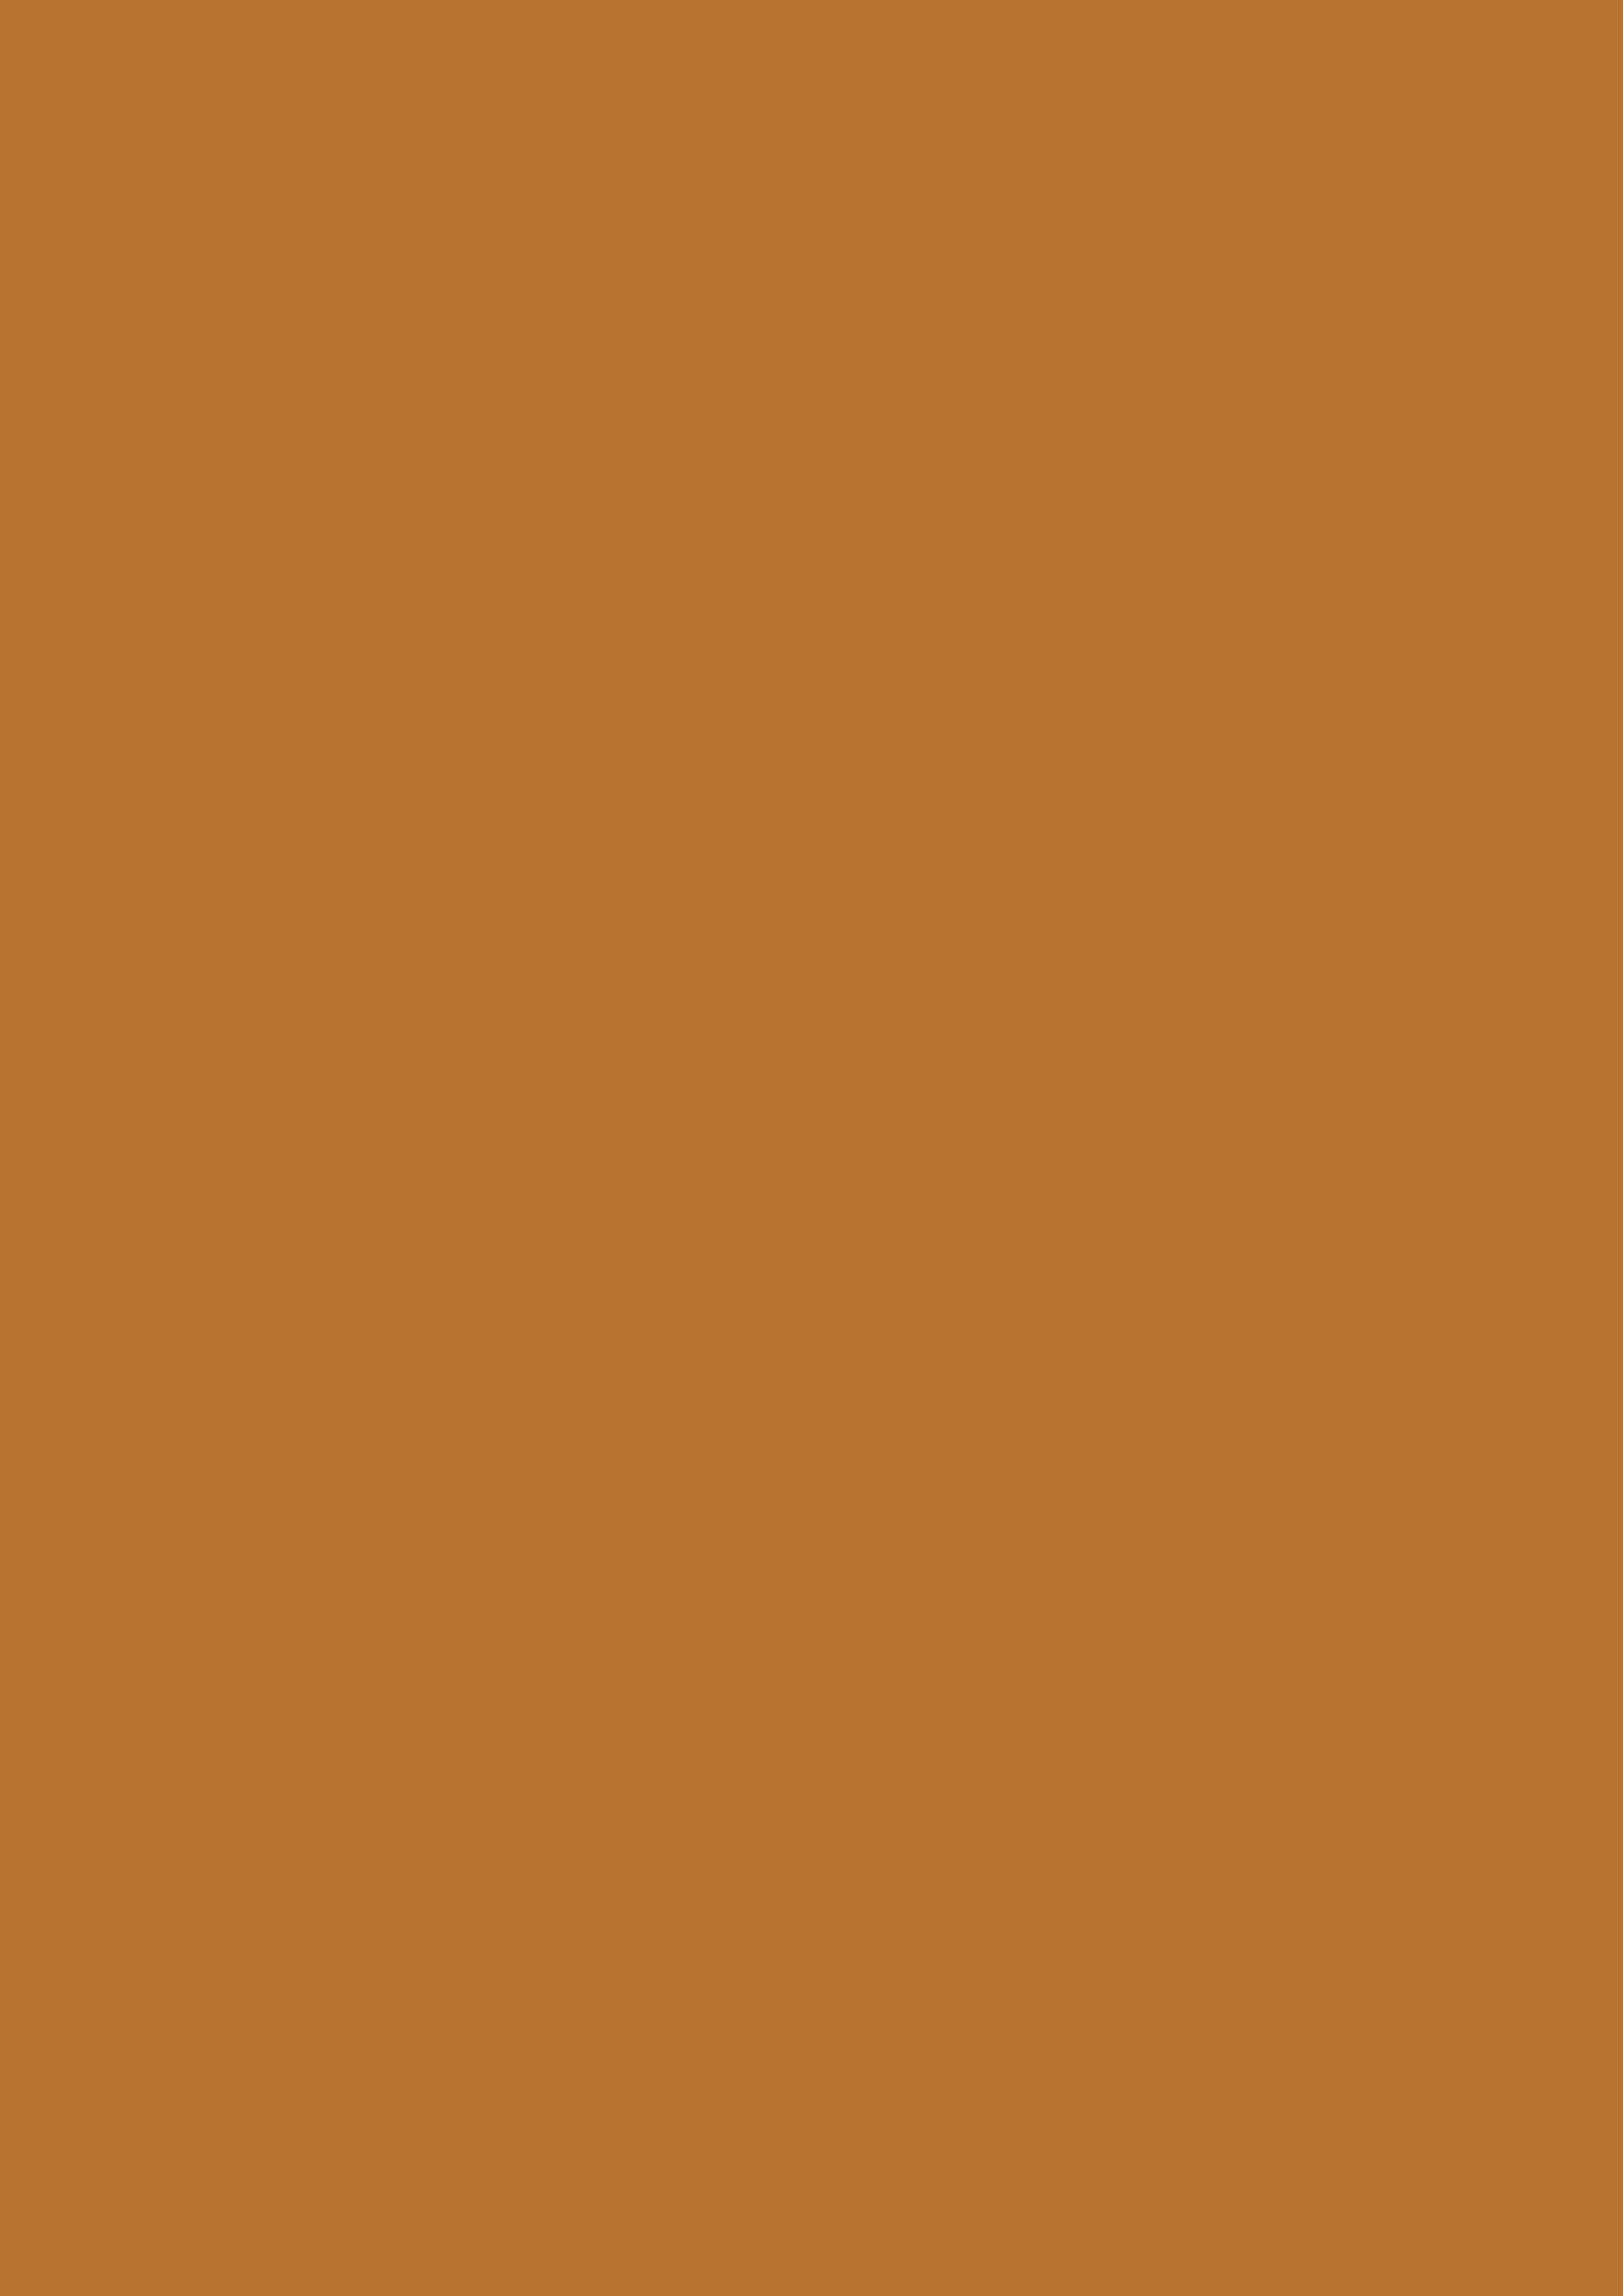 2480x3508 Copper Solid Color Background